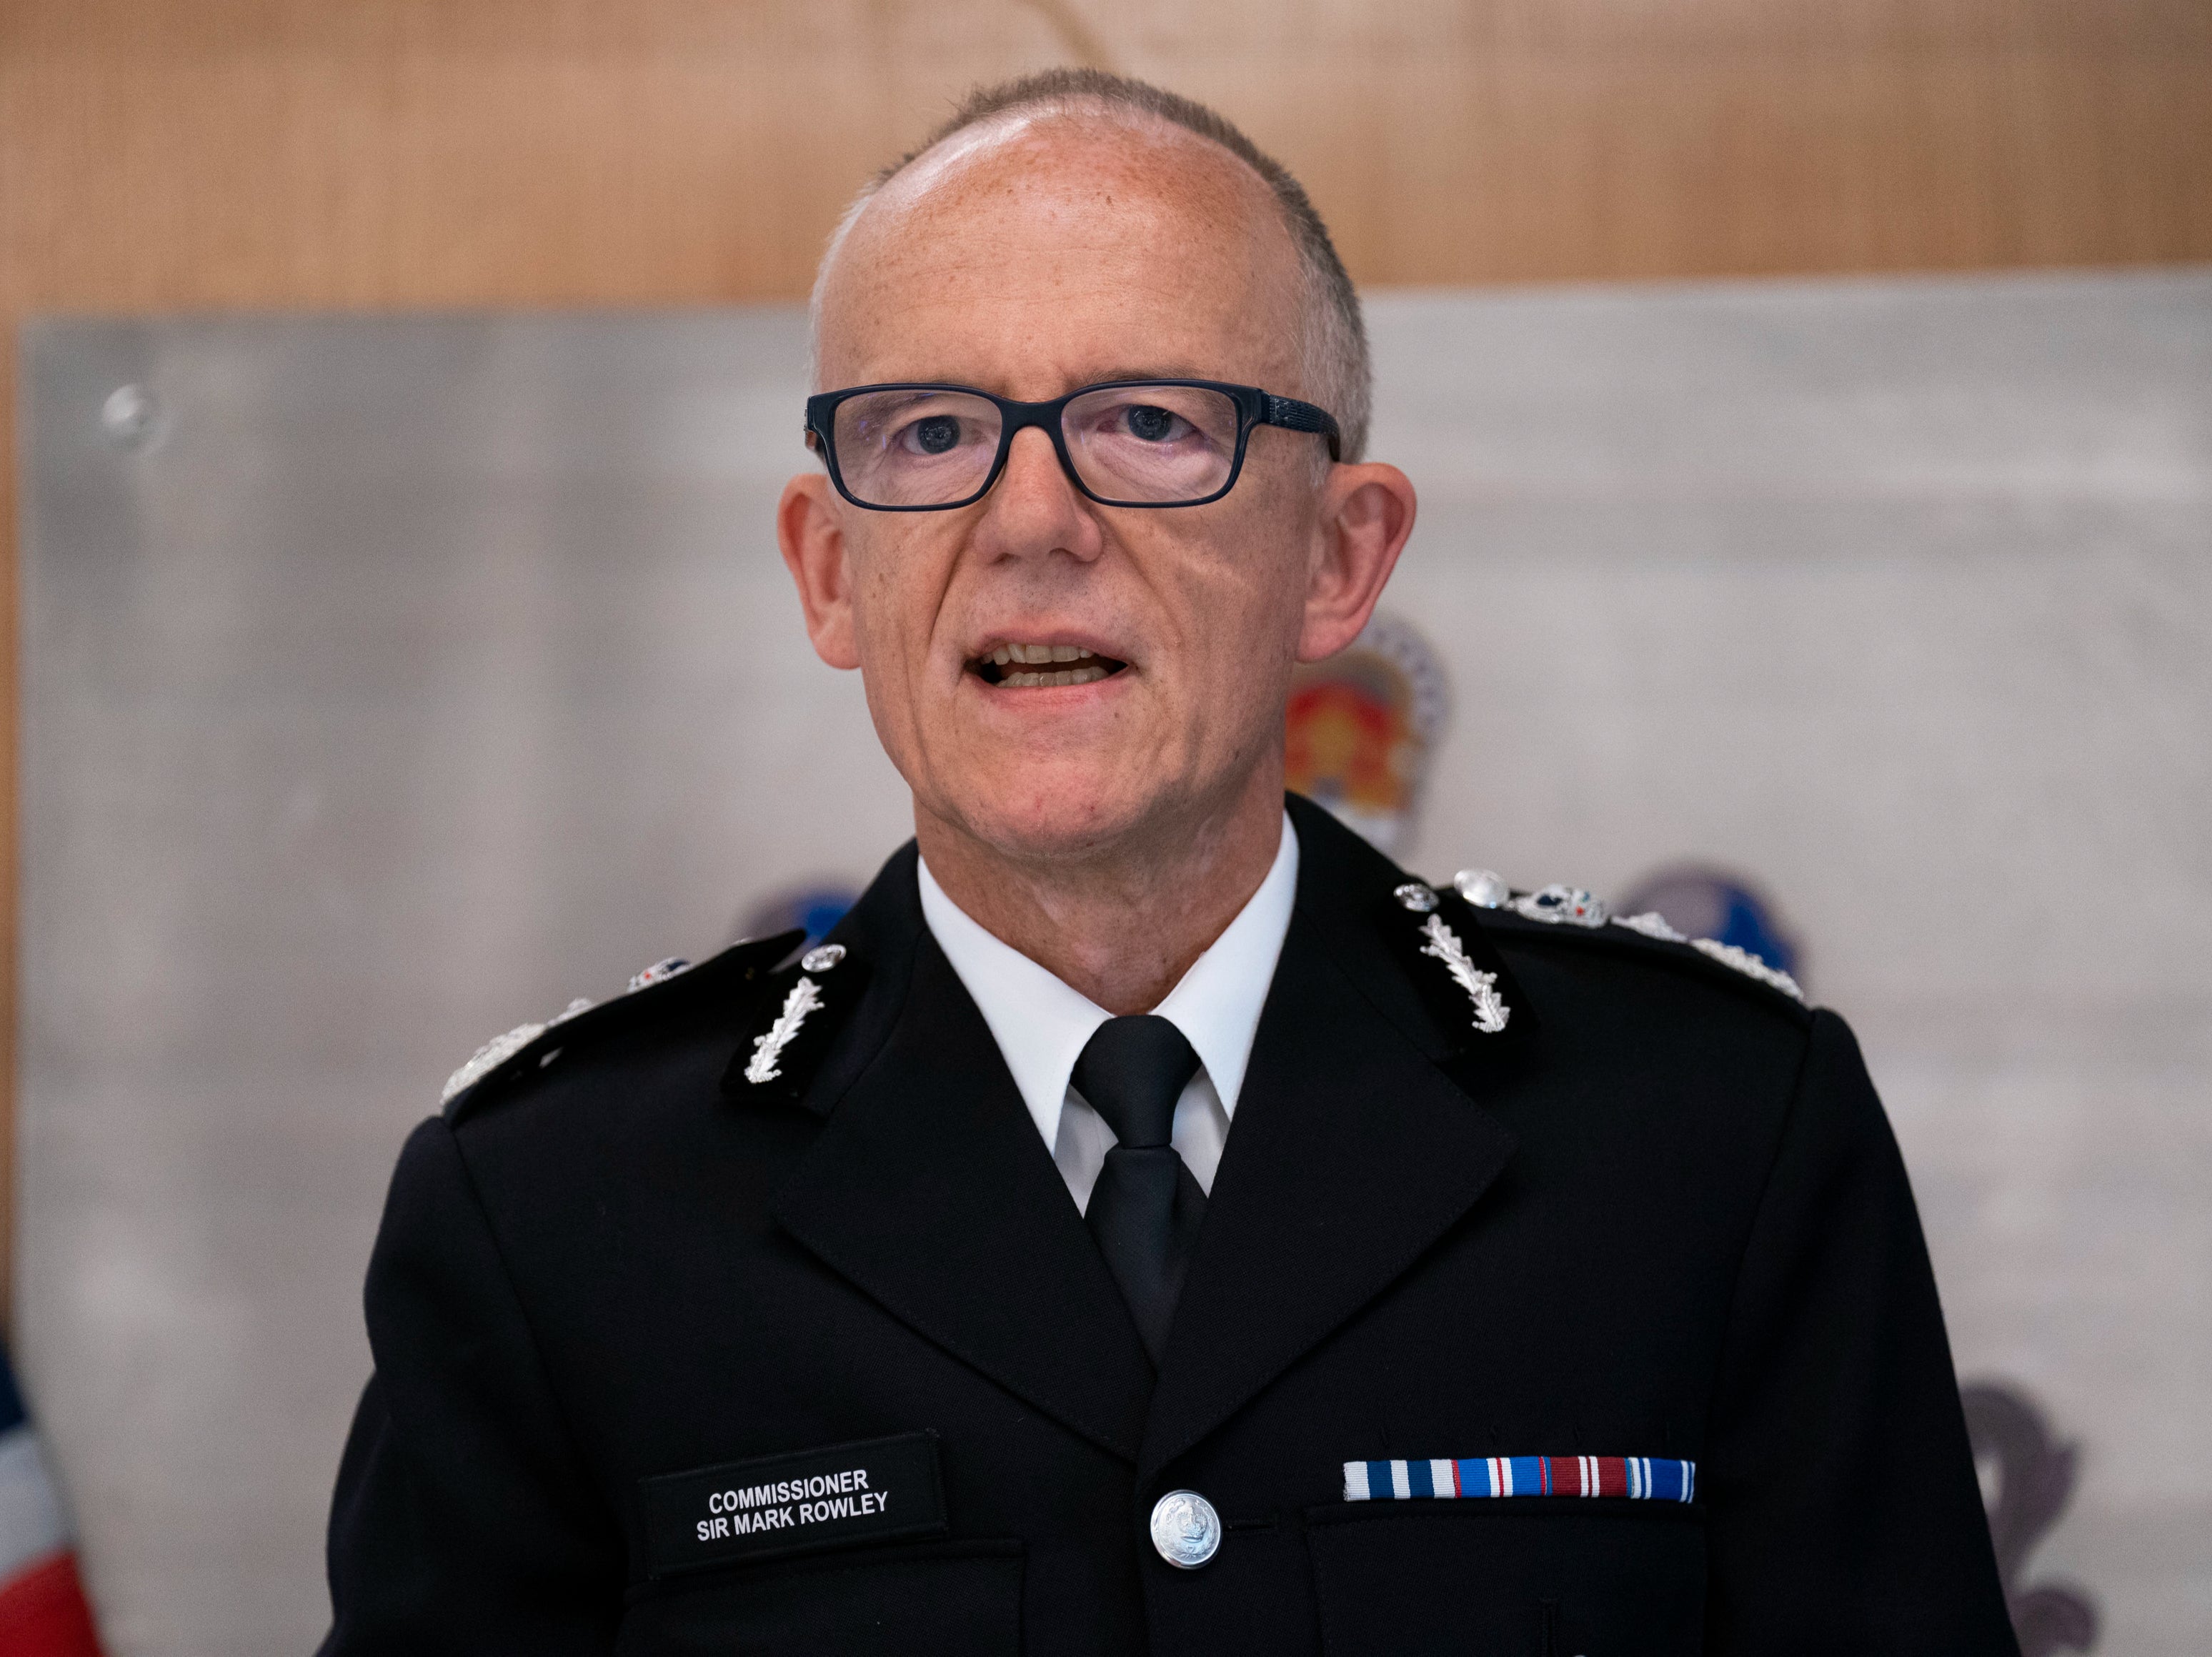 Sir Mark Rowley takes the oath at New Scotland Yard in central London, where he starts his first day as Metropolitan Police Commissioner on 12 September